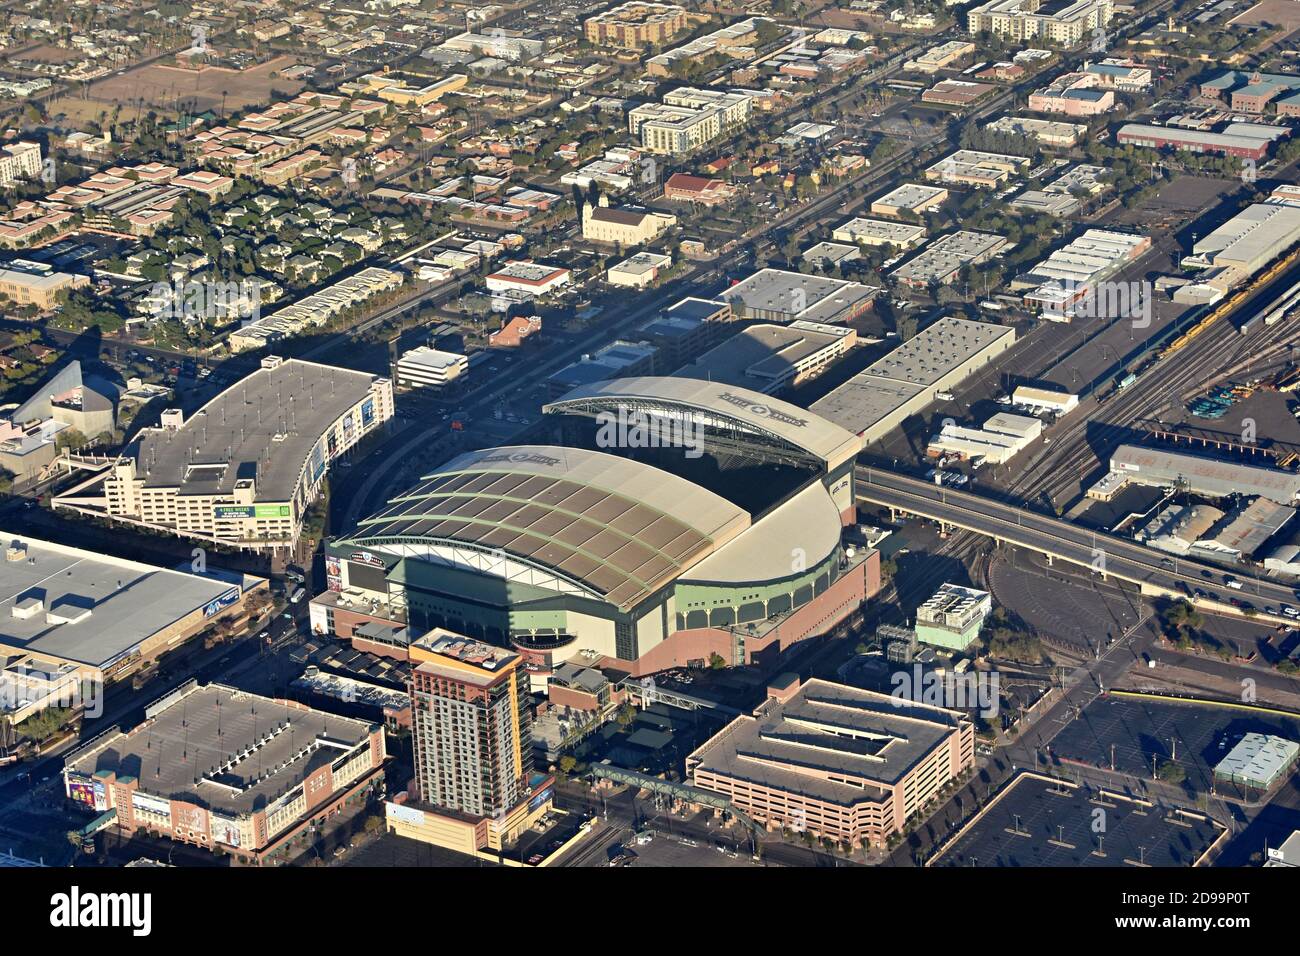 Aerial view from the airplane of retractable roof Chase Field baseball stadium and city skyline of downtown Phoenix, Arizona Stock Photo